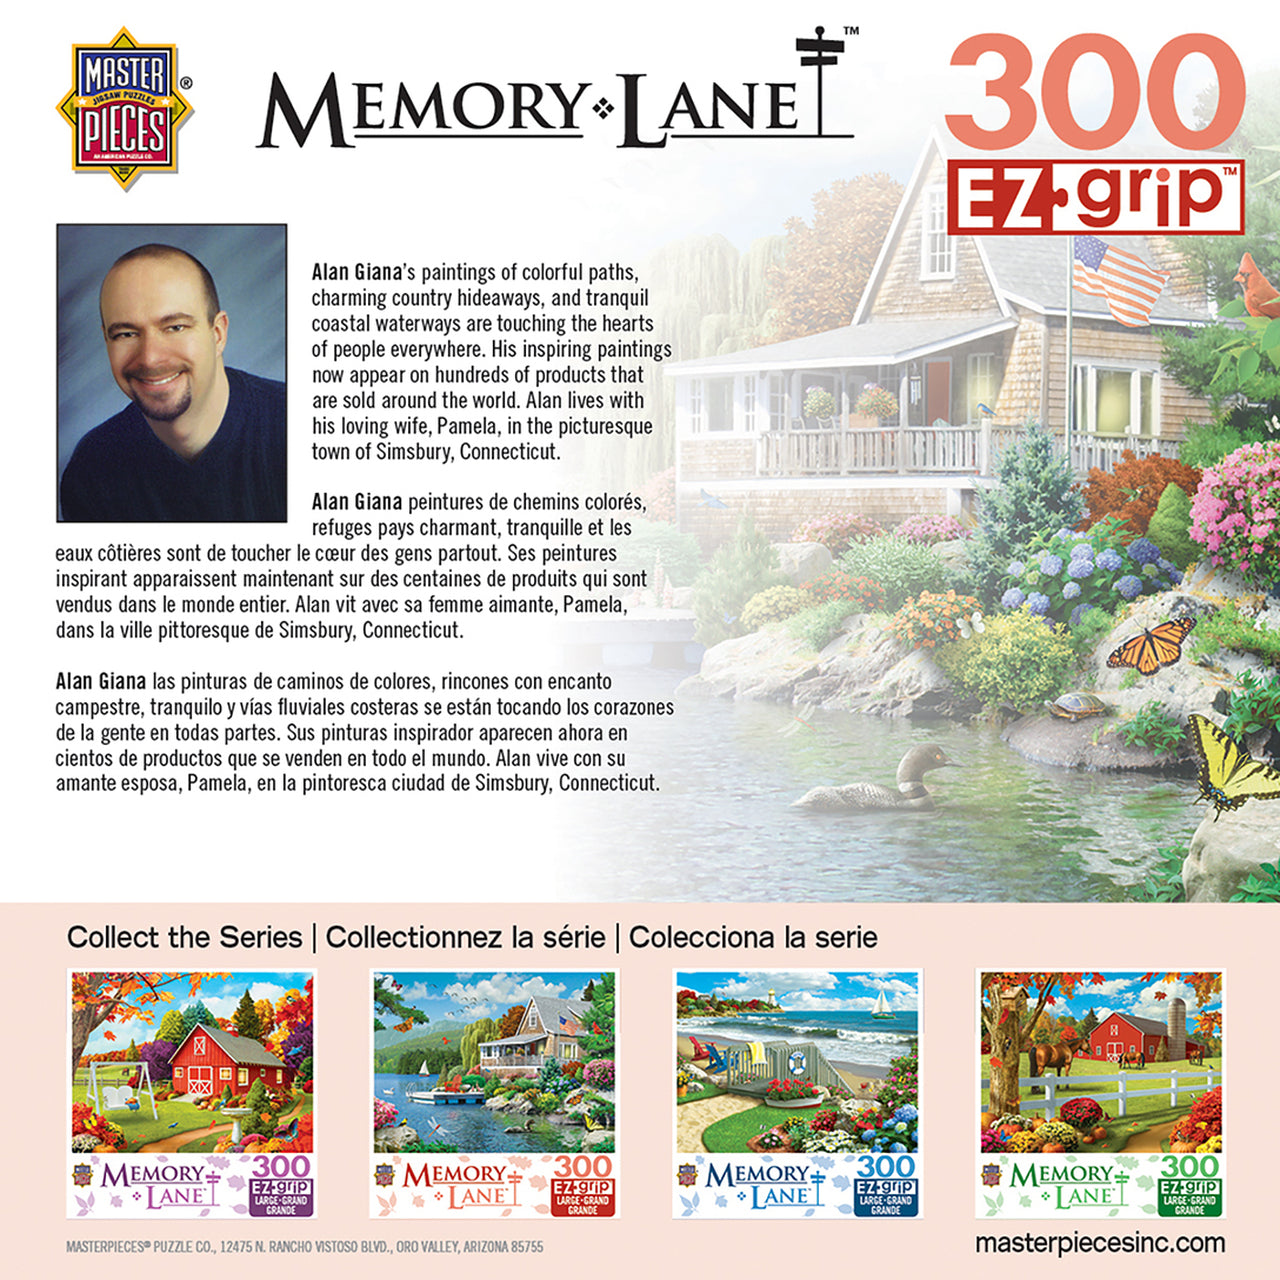 Memory Lane Lakeside Memories - Large 300 Piece EZGrip Jigsaw Puzzle by MasterPieces